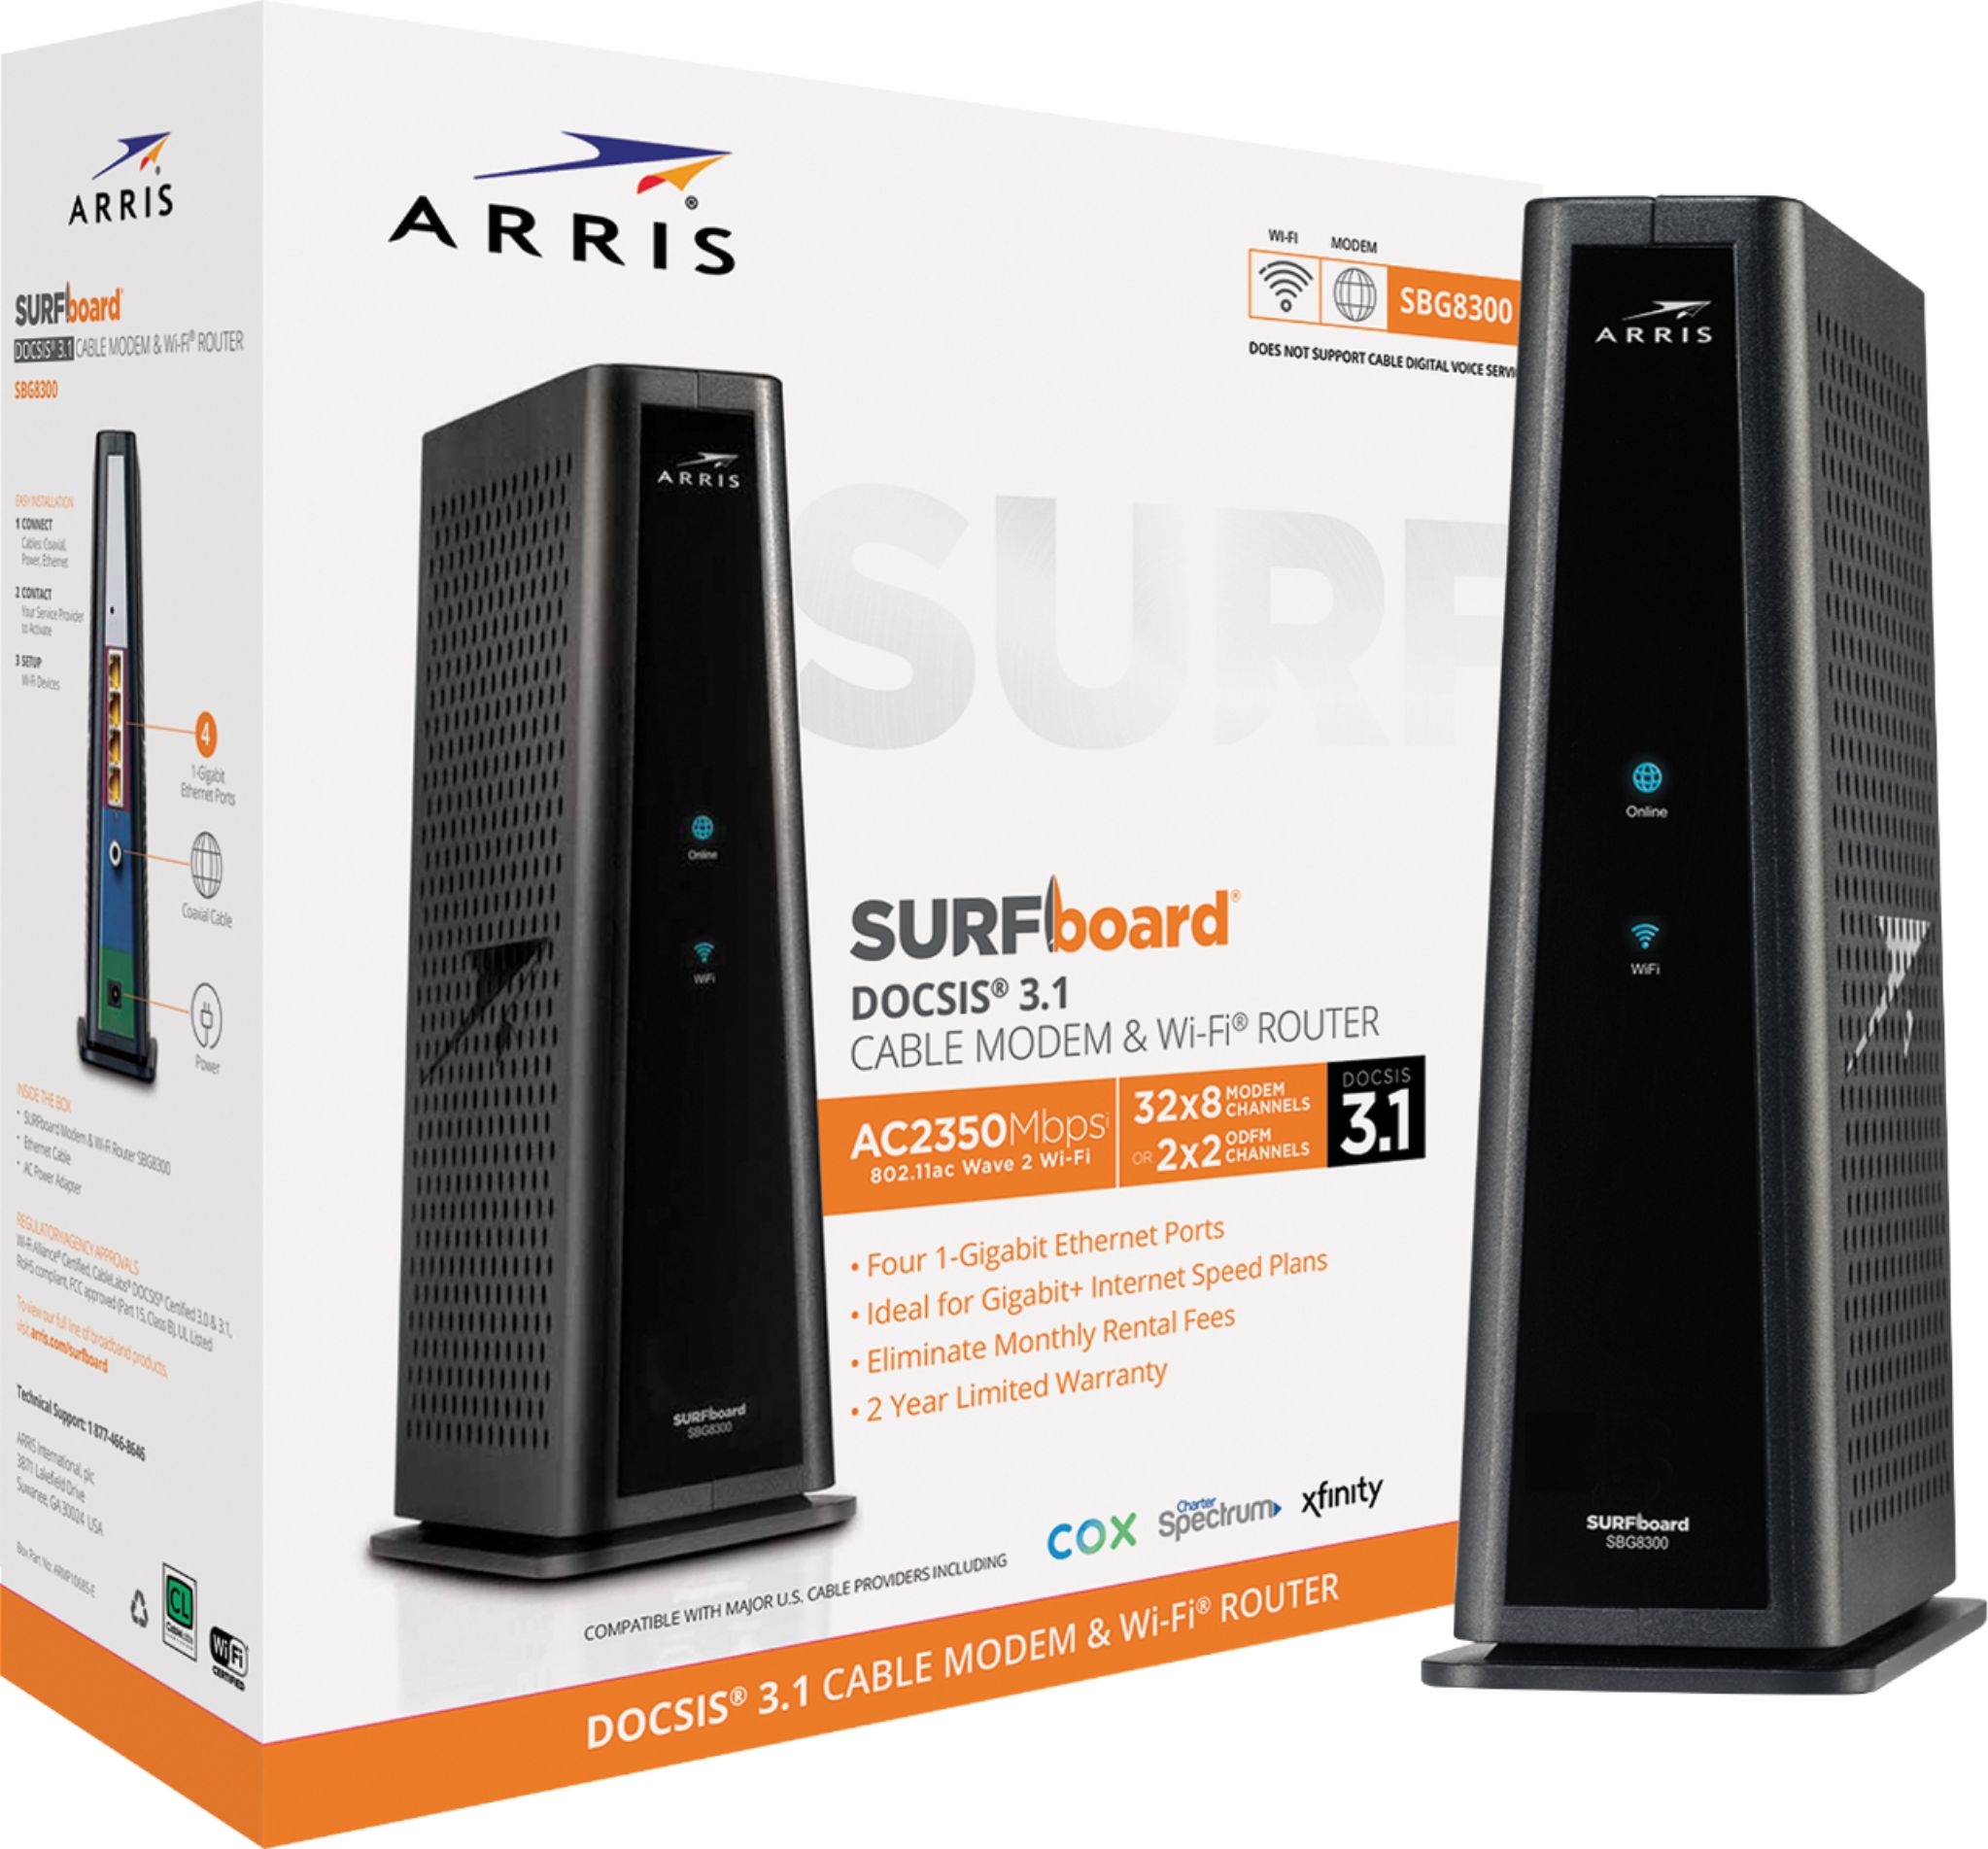 billig Grusom chokerende ARRIS SURFboard DOCSIS 3.1 Cable Modem & Dual-Band Wi-Fi Router for Xfinity  and Cox service tiers Black SBG8300 - Best Buy